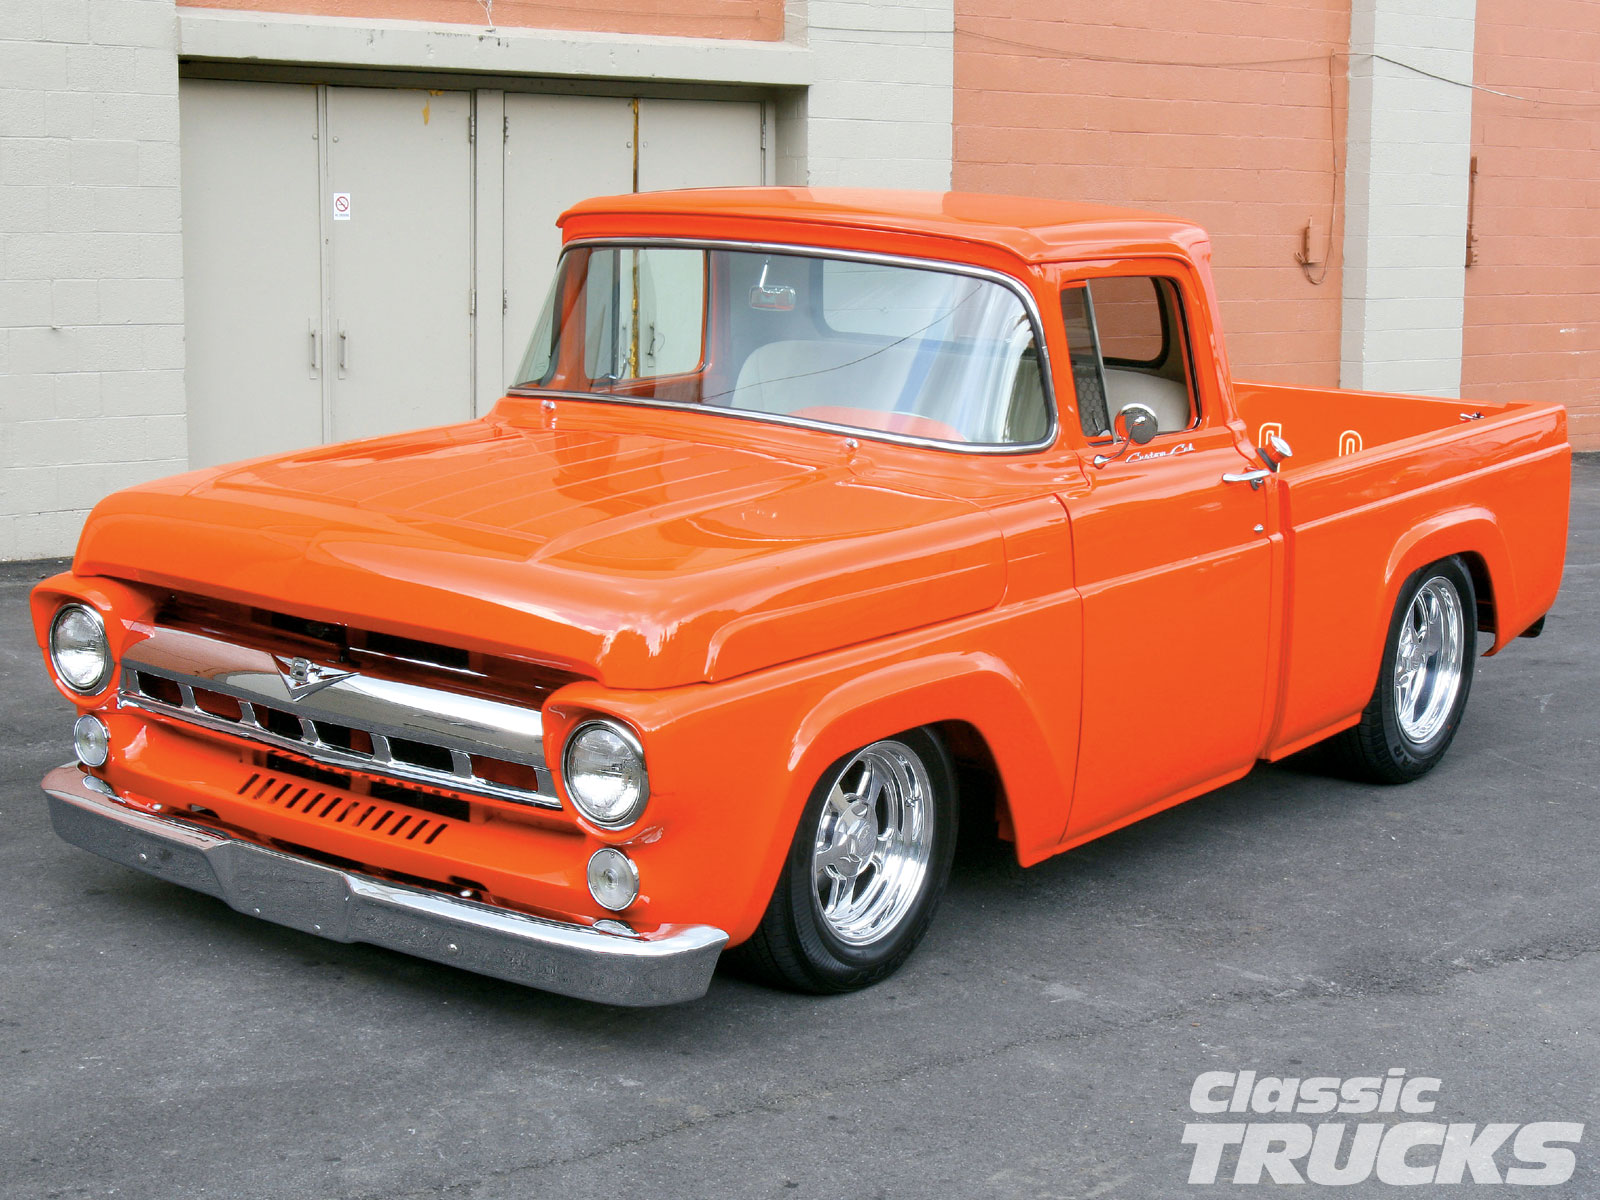 1957 Ford F-100 Pics, Vehicles Collection - Ford F 100 57 - HD Wallpaper 